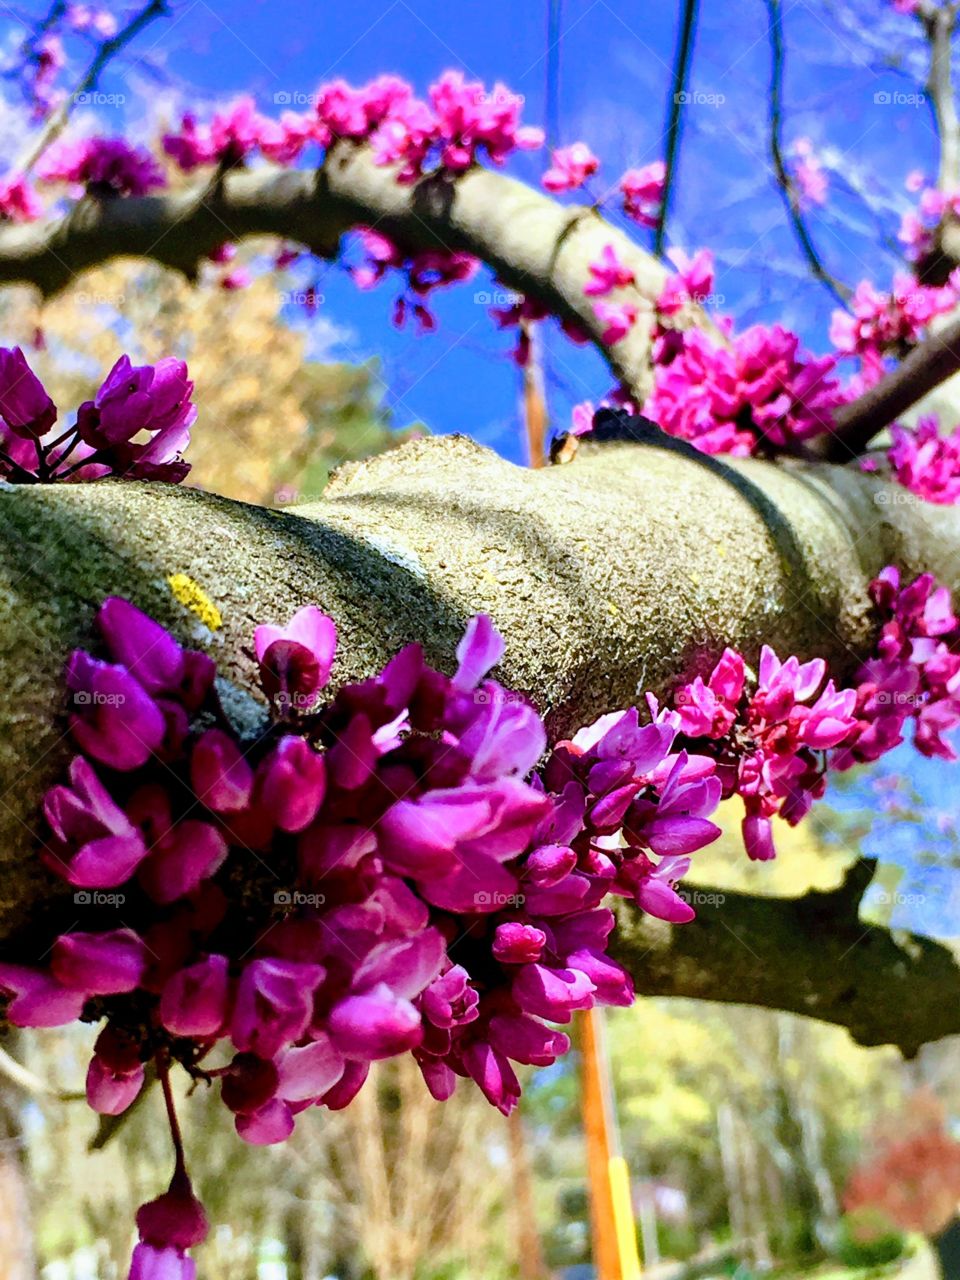 Blooms to branch out on- Texas redbud shows how bright it can be-